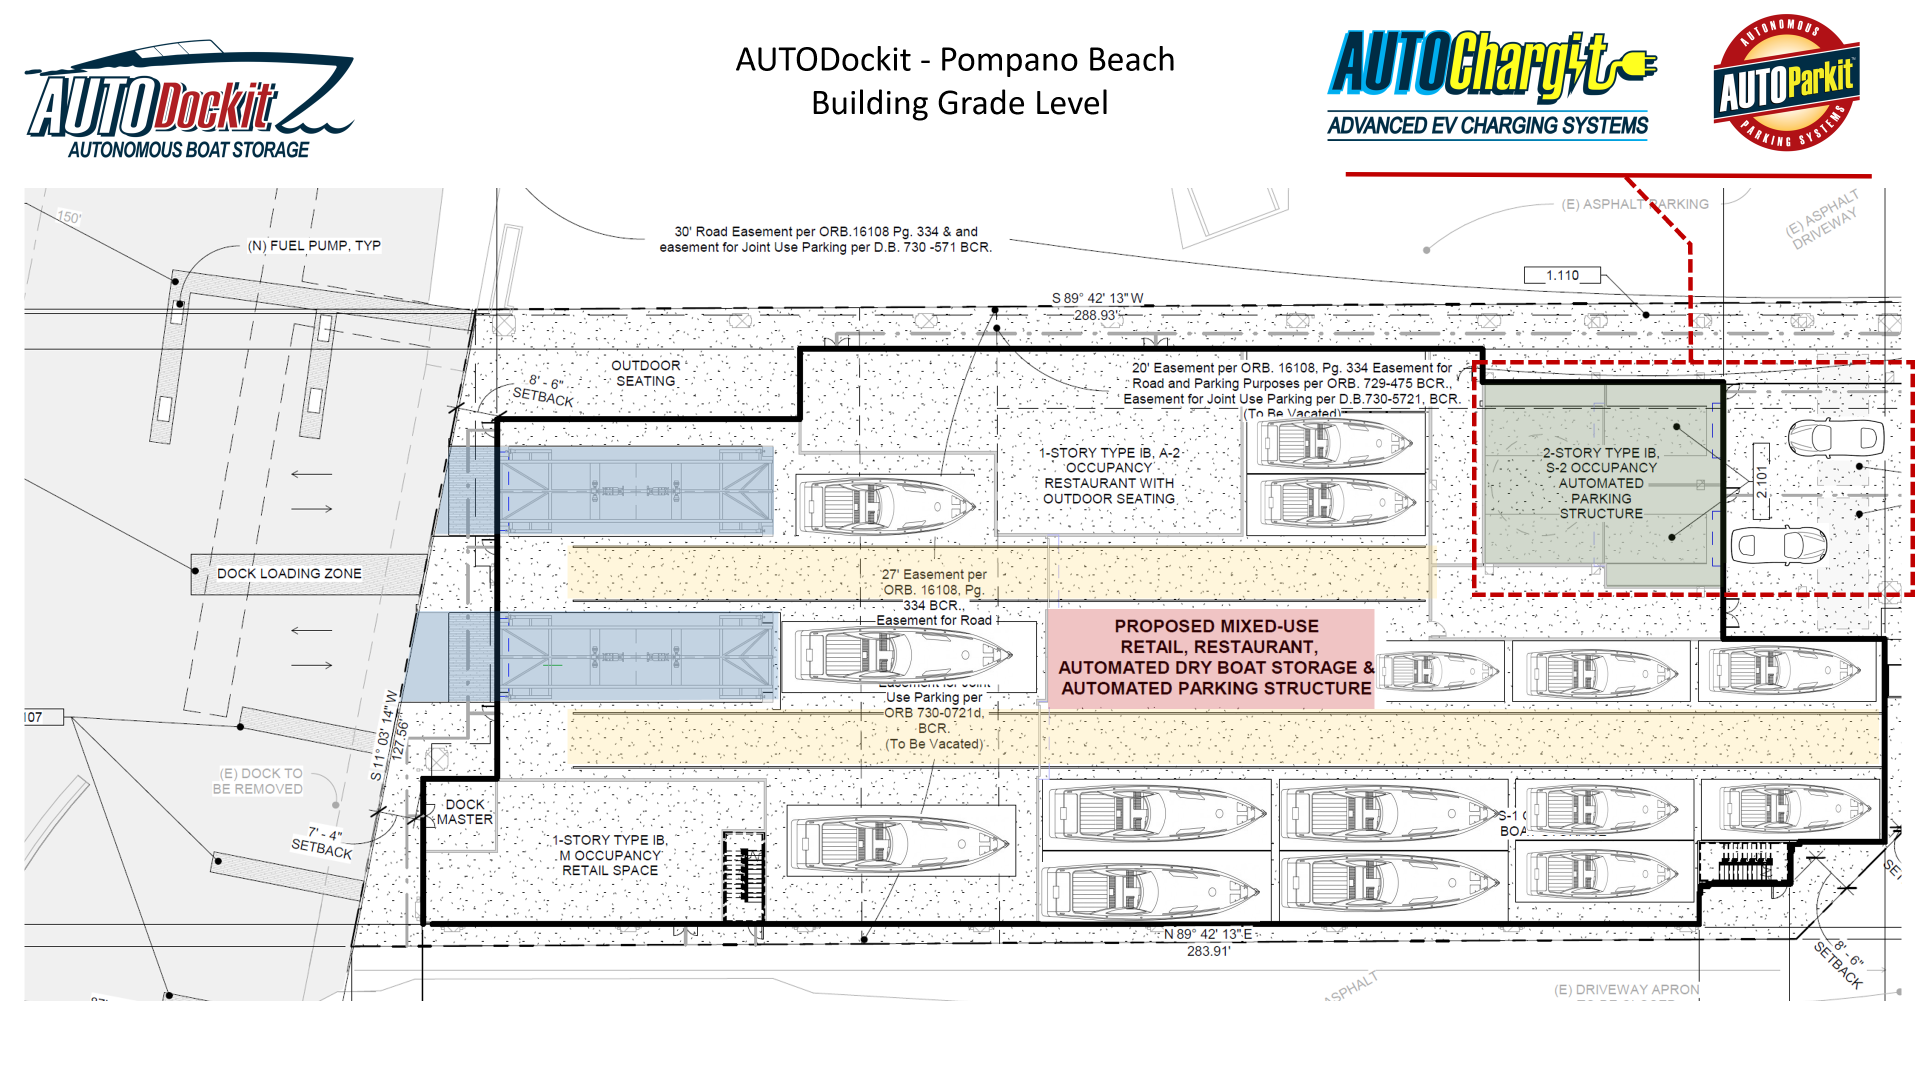 Proposed Taha Maina AUTODockit Plan View integrated with AUTOParkit and AUTOChargit Automated